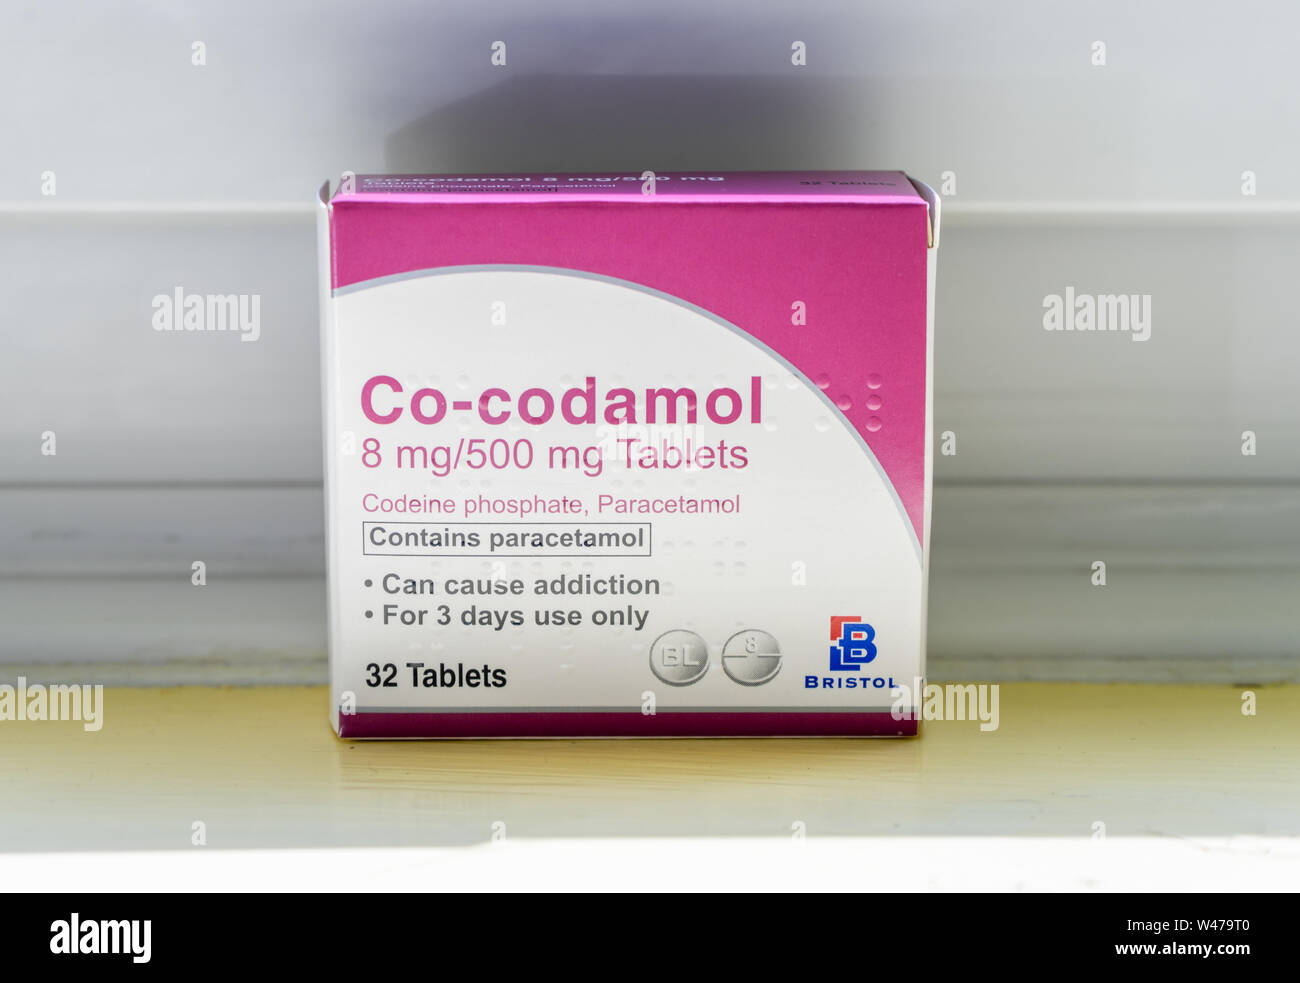 THIS IS A STOCK PHOTO - A box of Co-codamol tablets containing 8 mg of Codeine and 500 mg Paracetamol Stock Photo